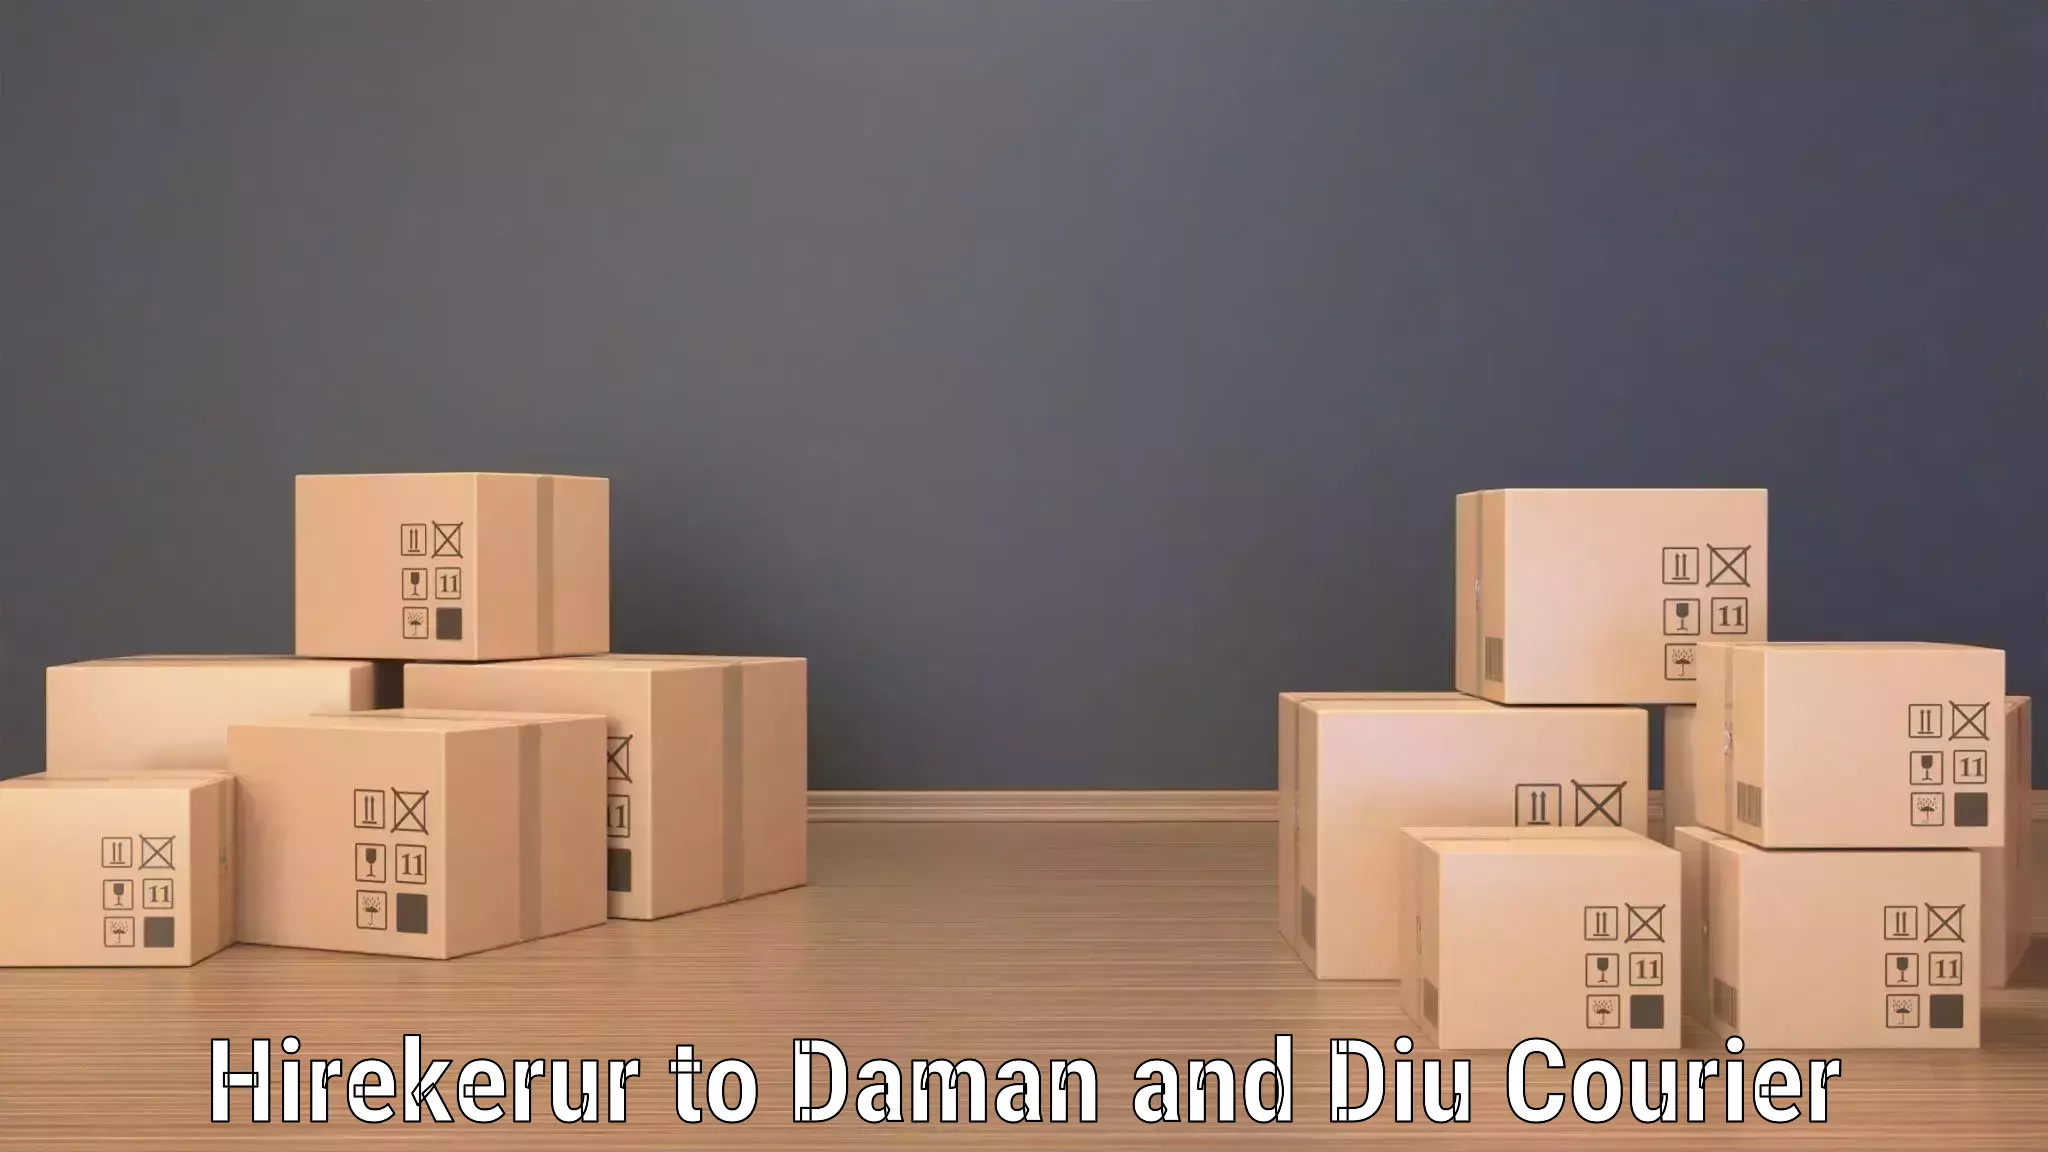 Express package services Hirekerur to Daman and Diu